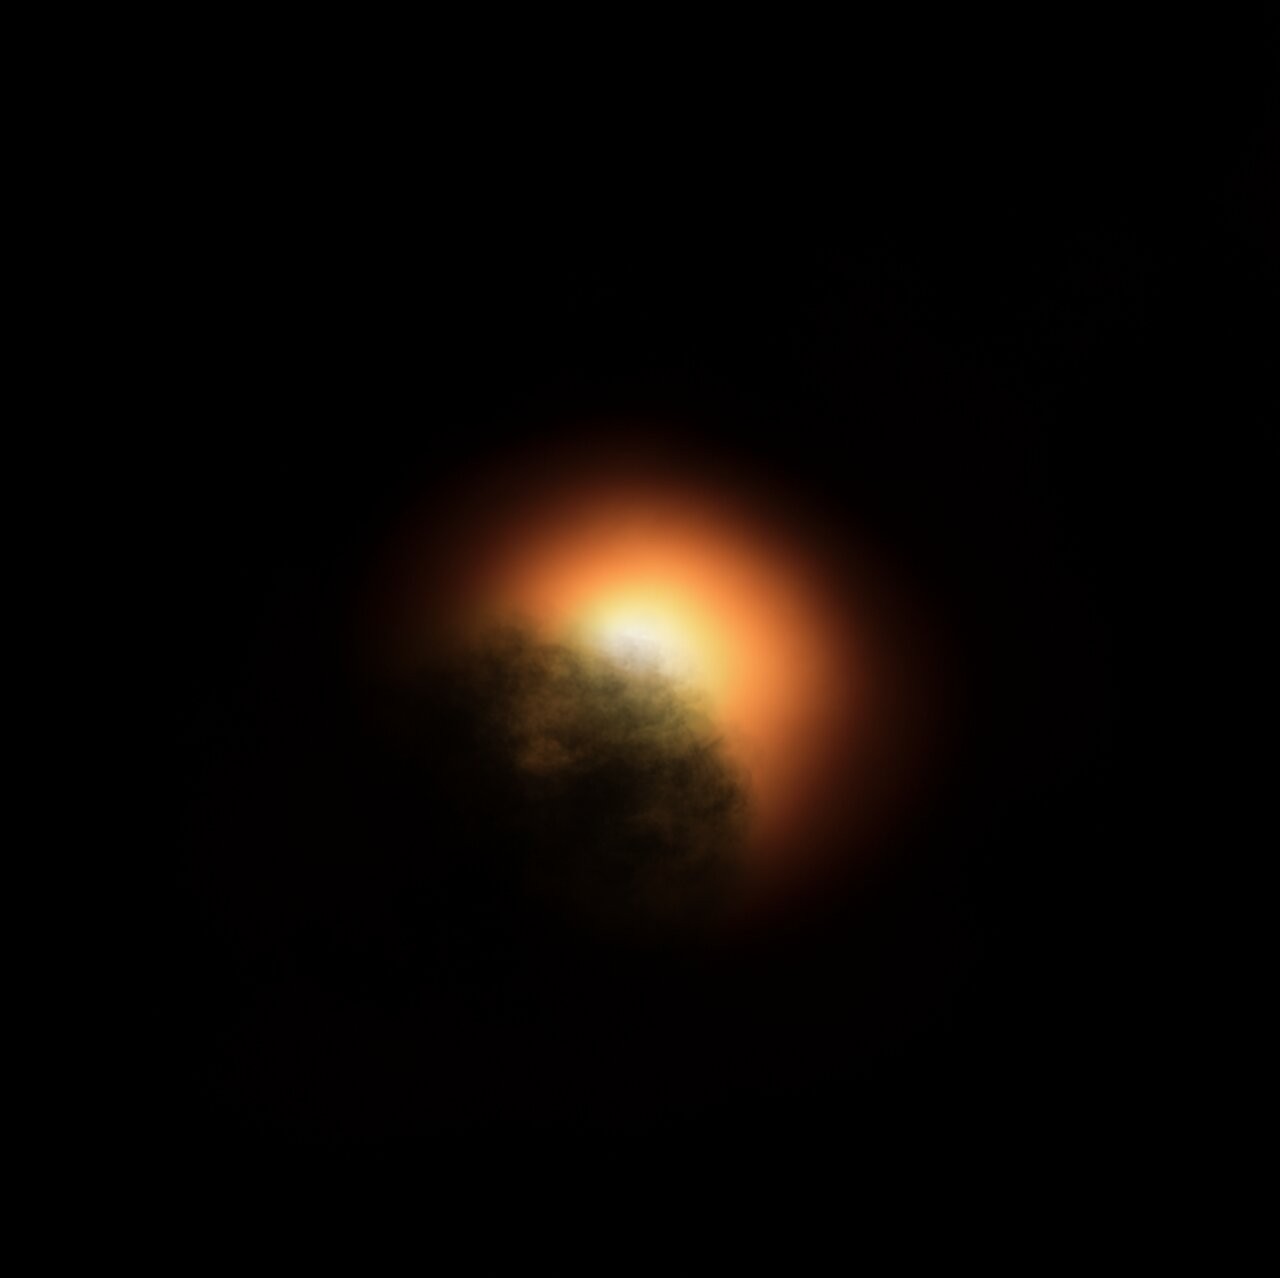 New observations by the NASA/ESA Hubble Space Telescope suggest that the unexpected dimming of the supergiant star Betelgeuse was most likely caused by an immense amount of hot material that was ejected into space, forming a dust cloud that blocked starli (Foto: ESO, ESA/Hubble, M. Kornmesser)